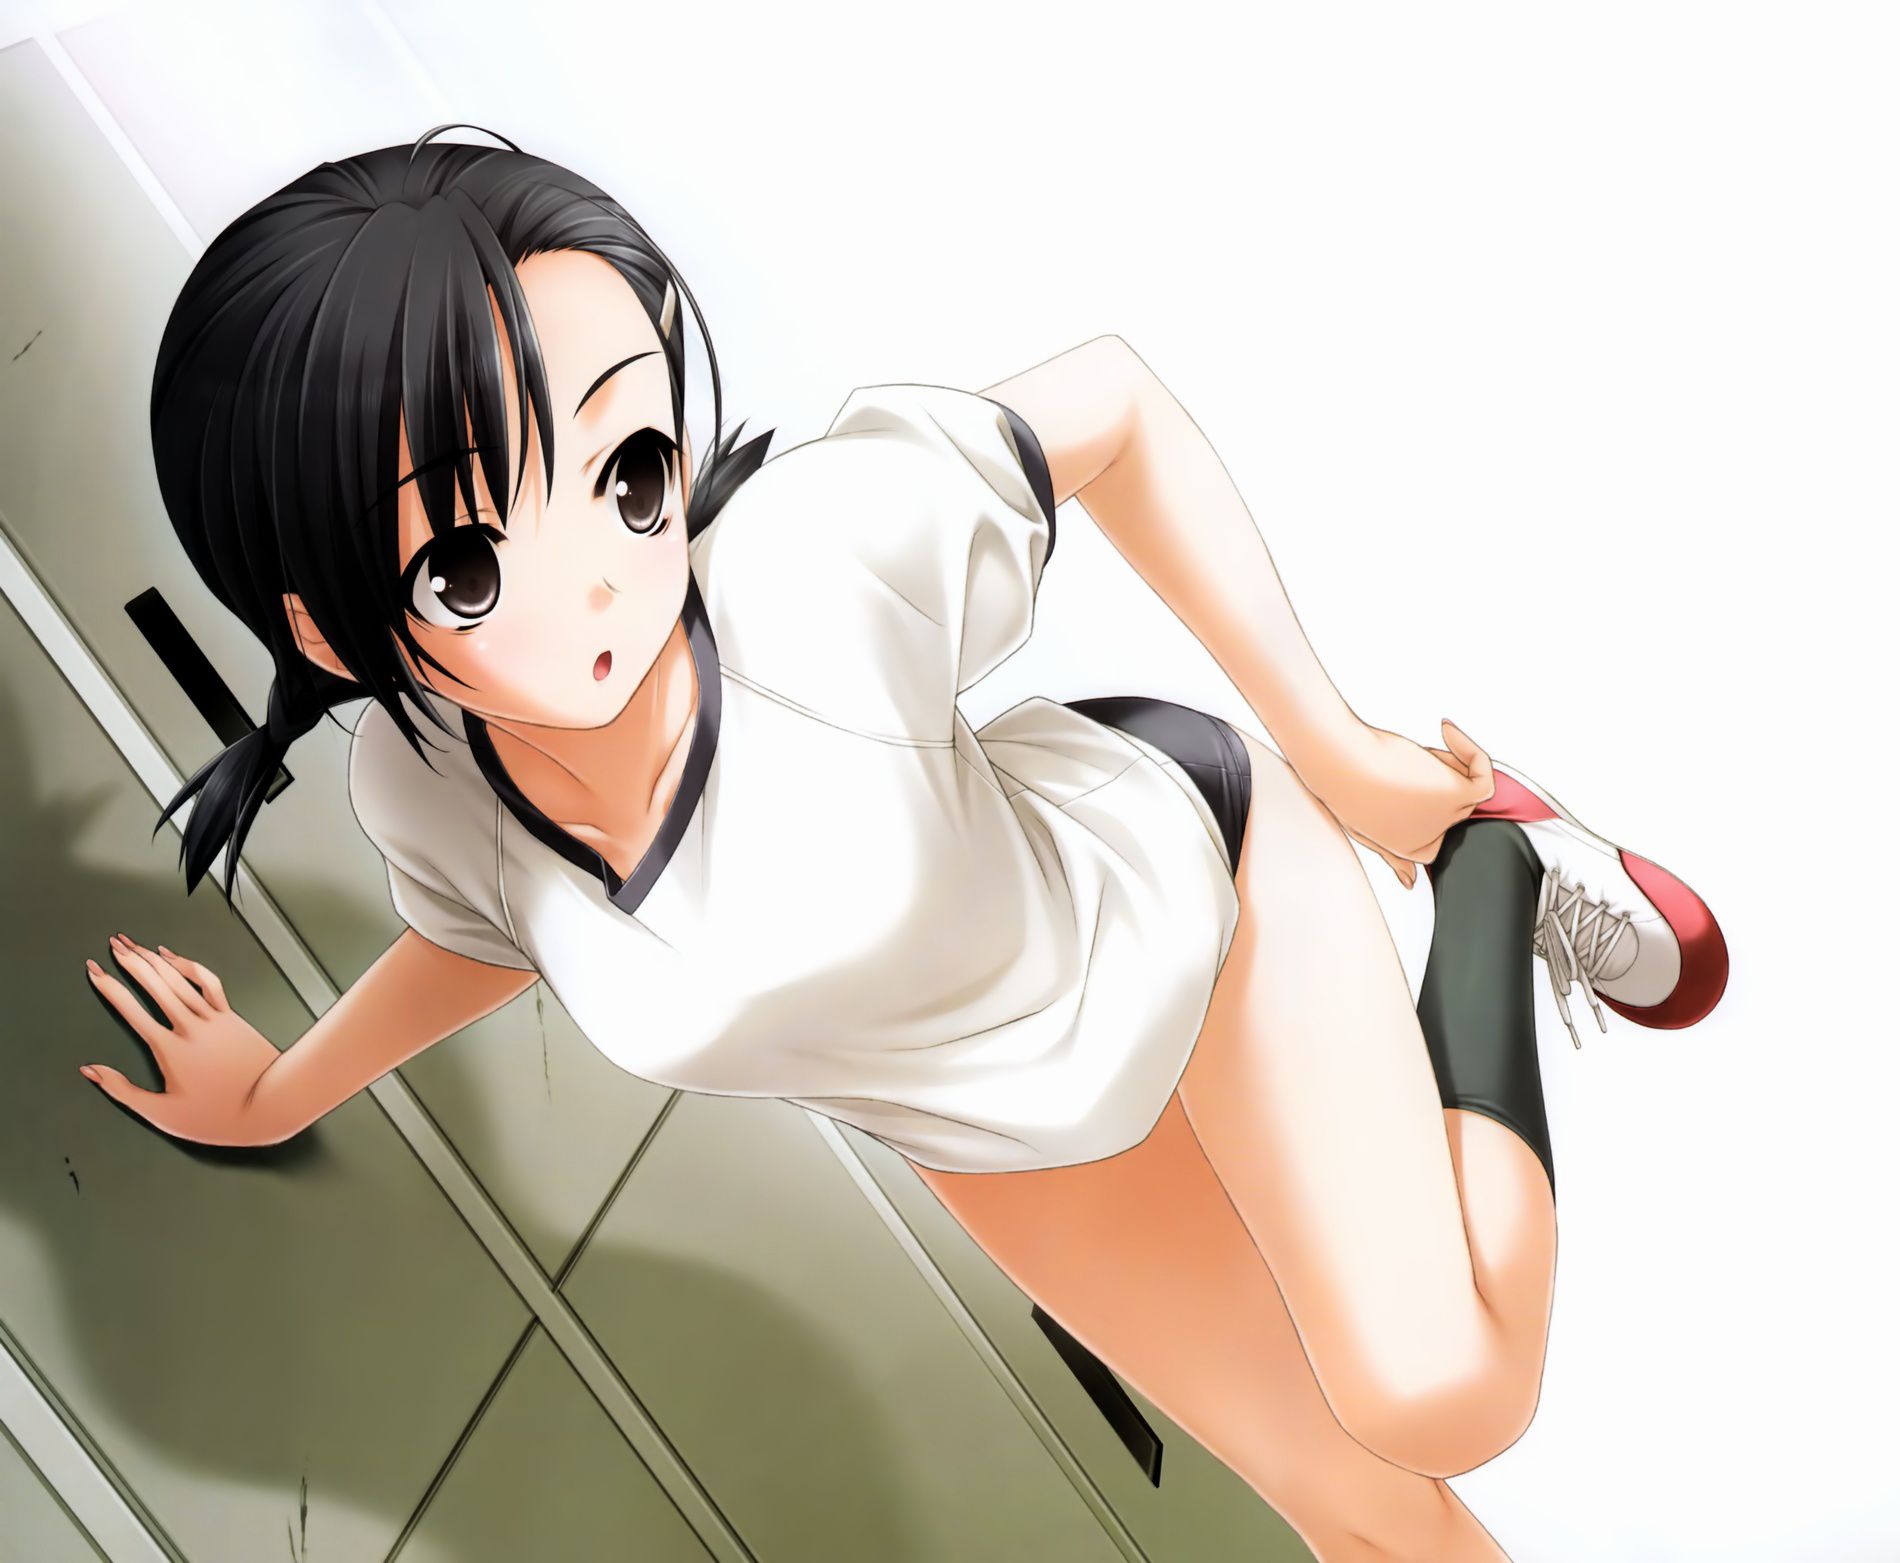 Cane want thighs! The second erotic image of the girl wearing bloomers and gymnastics wwww part2 16